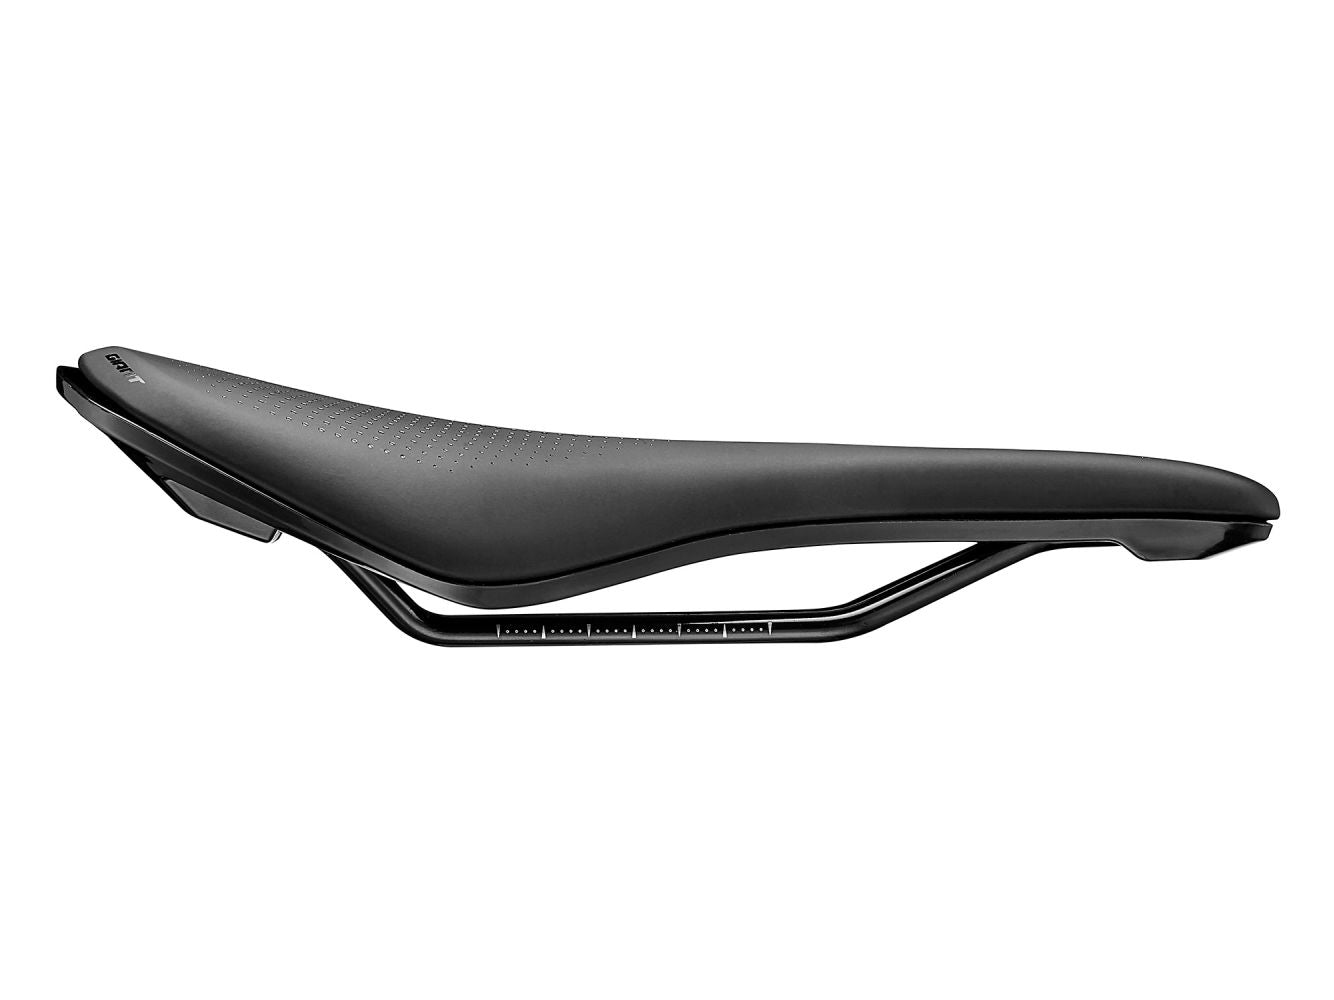 GIANT APPROACH SADDLE